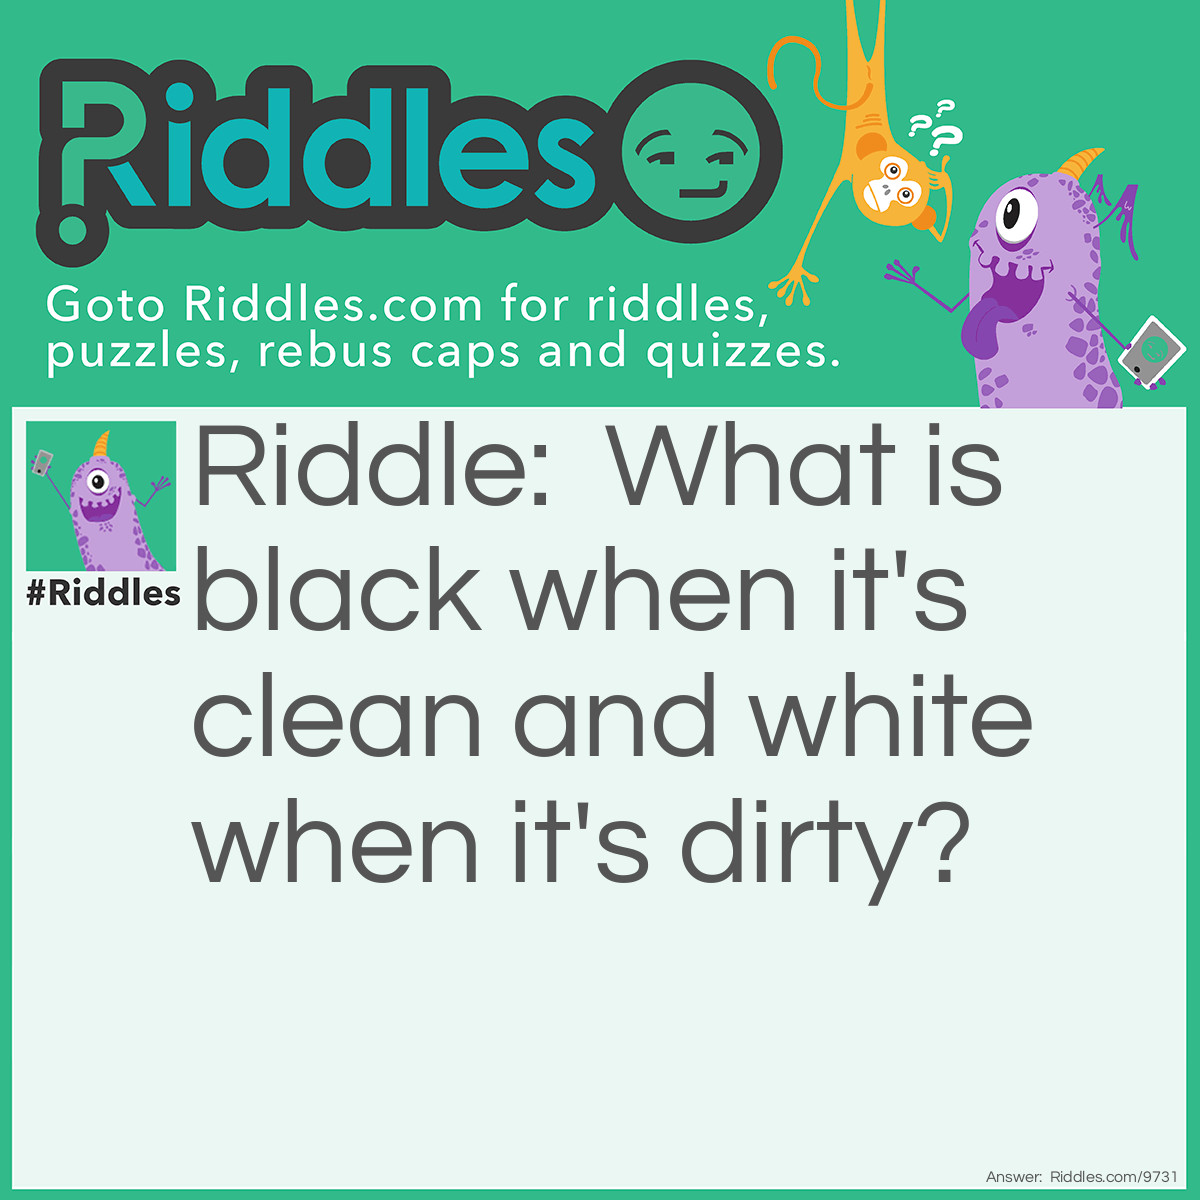 Riddle: What is black when it's clean and white when it's dirty? Answer: A chalkboard (Blackboard)